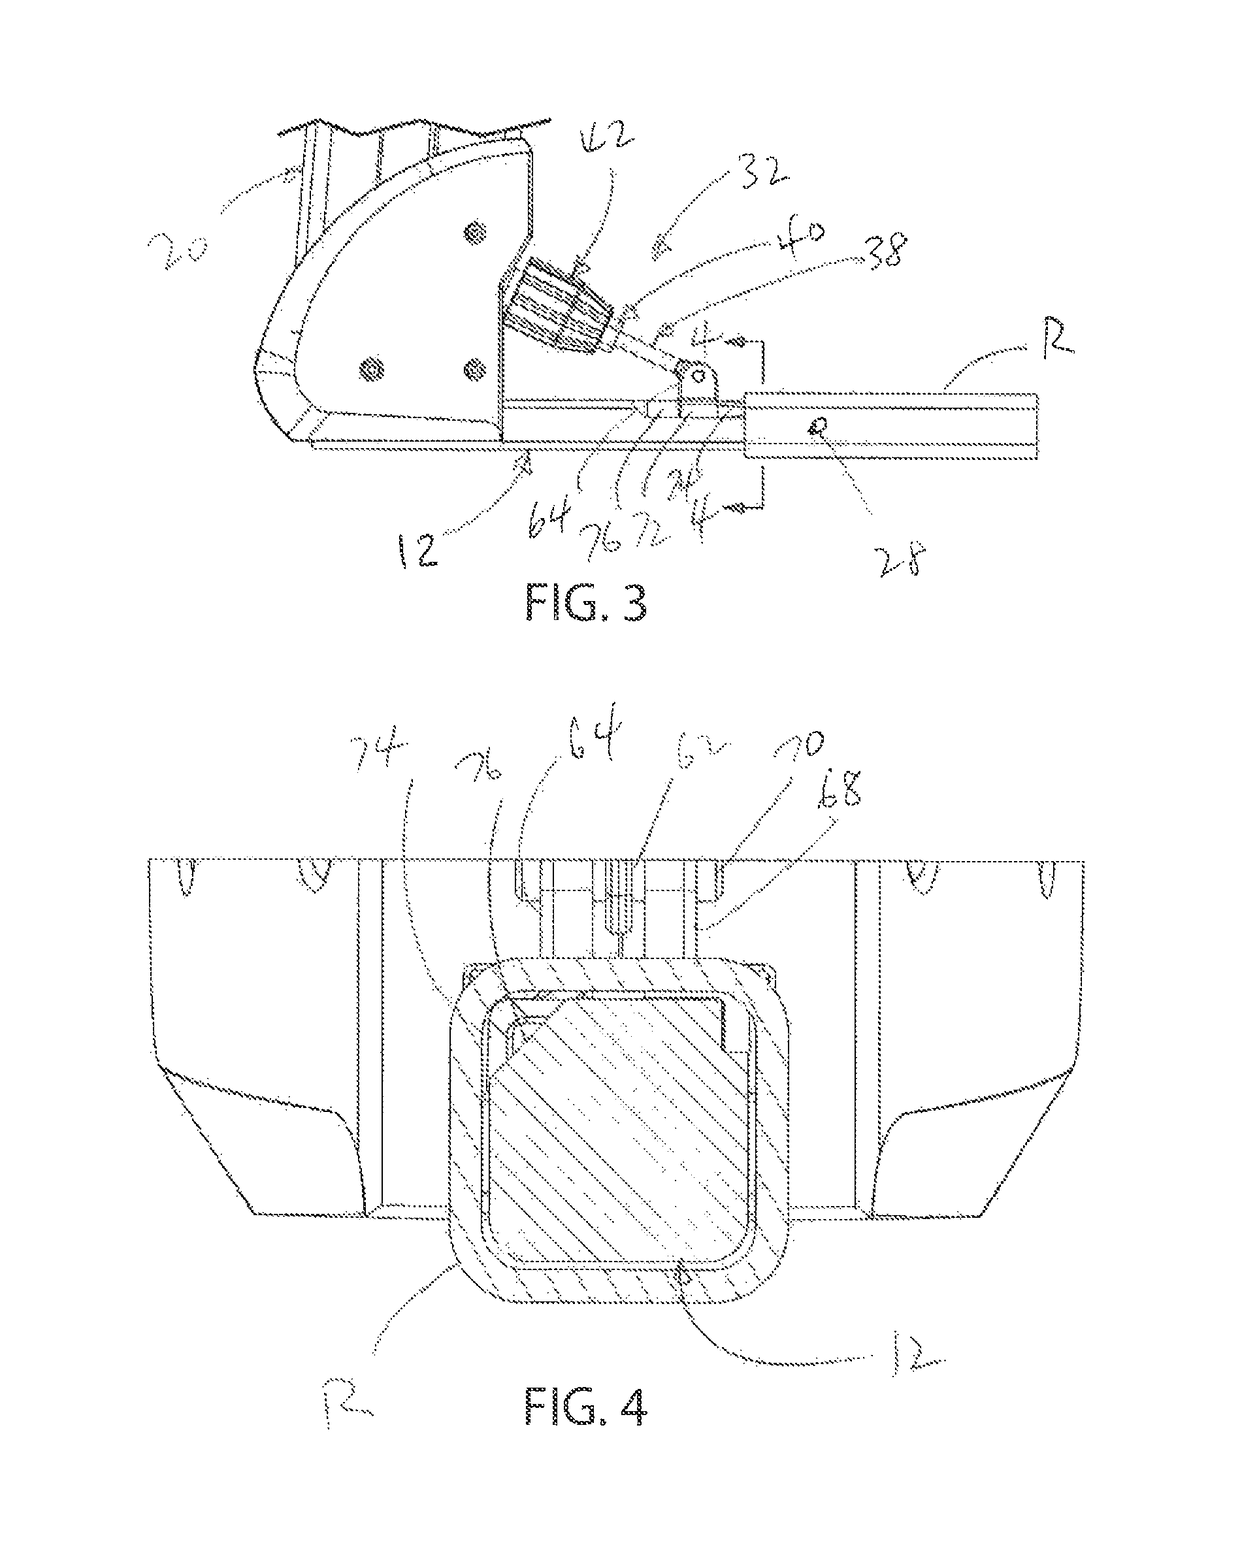 Tool-less wedge-type anti-rattle mounting system for a vehicle-mounted equipment carrier